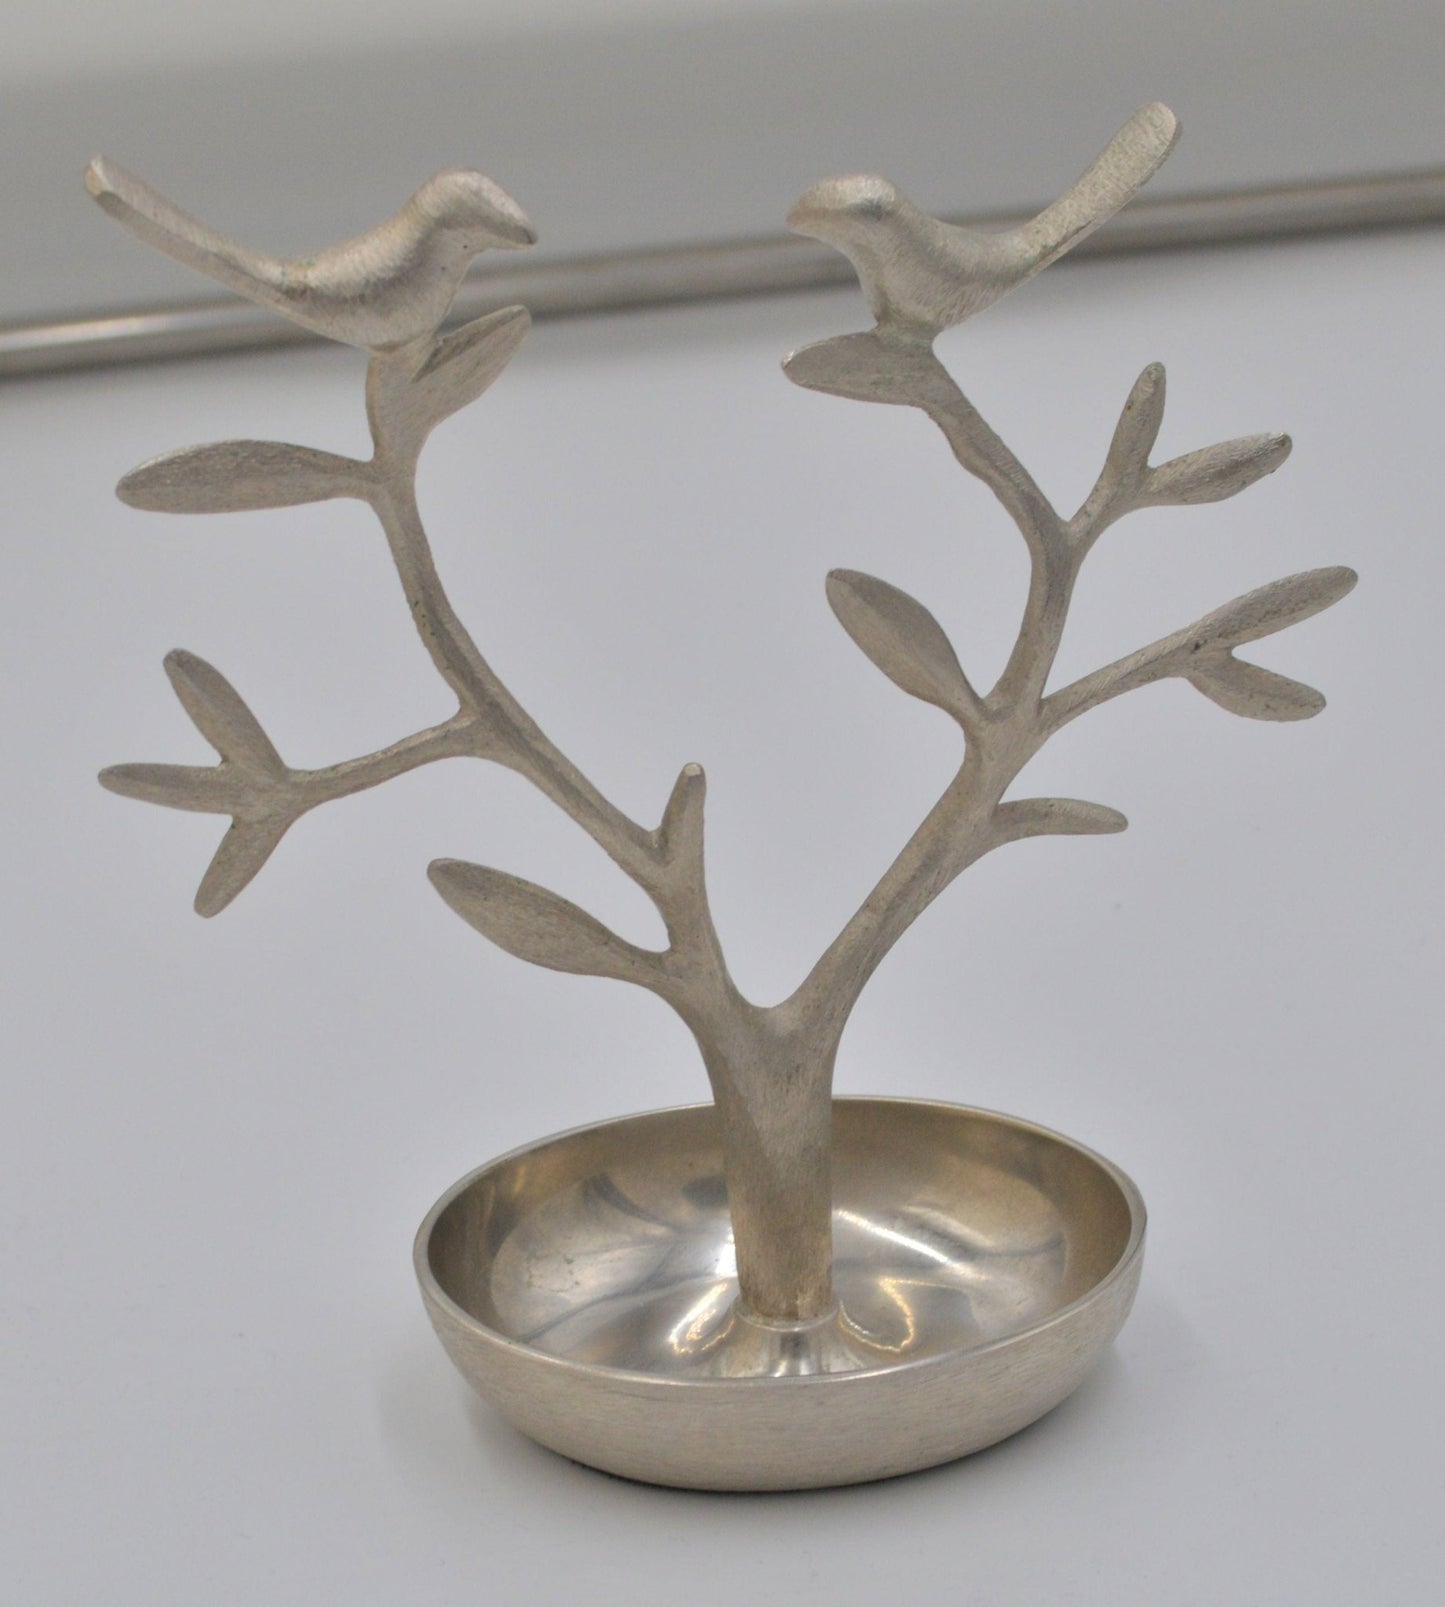 VINTAGE RED ENVELOPE SILVER METAL JEWELLERY TREE WITH BIRDS(PREVIOUSLY OWNED) VERY GOOD CONDITION - TMD167207